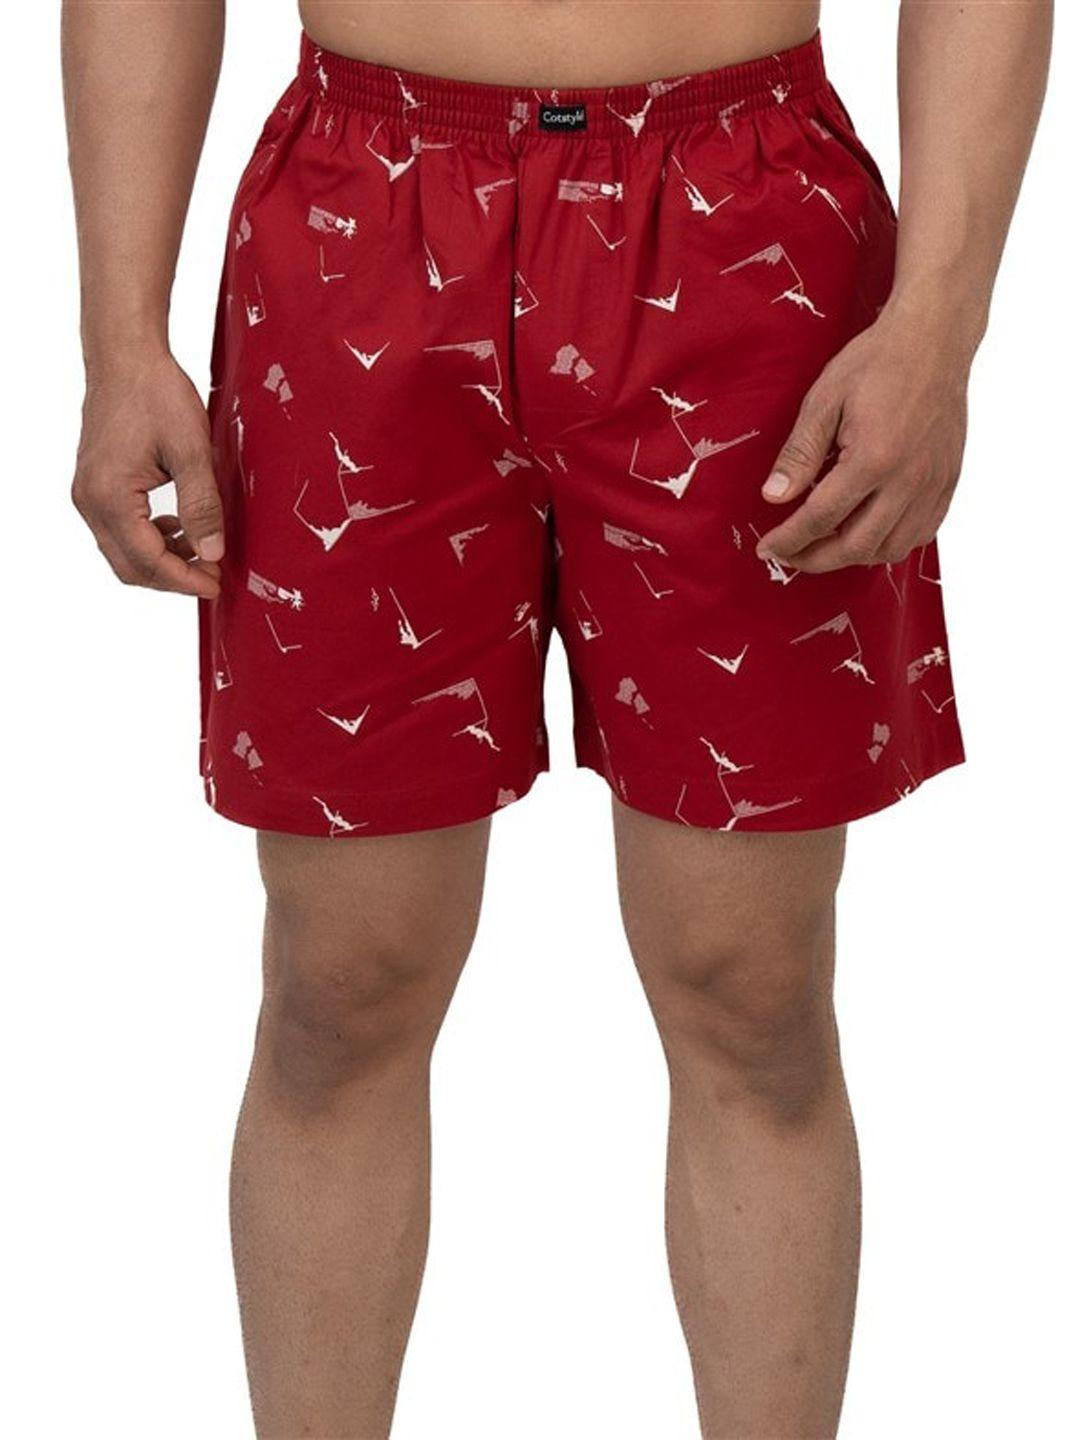 cotstyle-printed-pure-cotton-boxer-bxr_1025_red-s